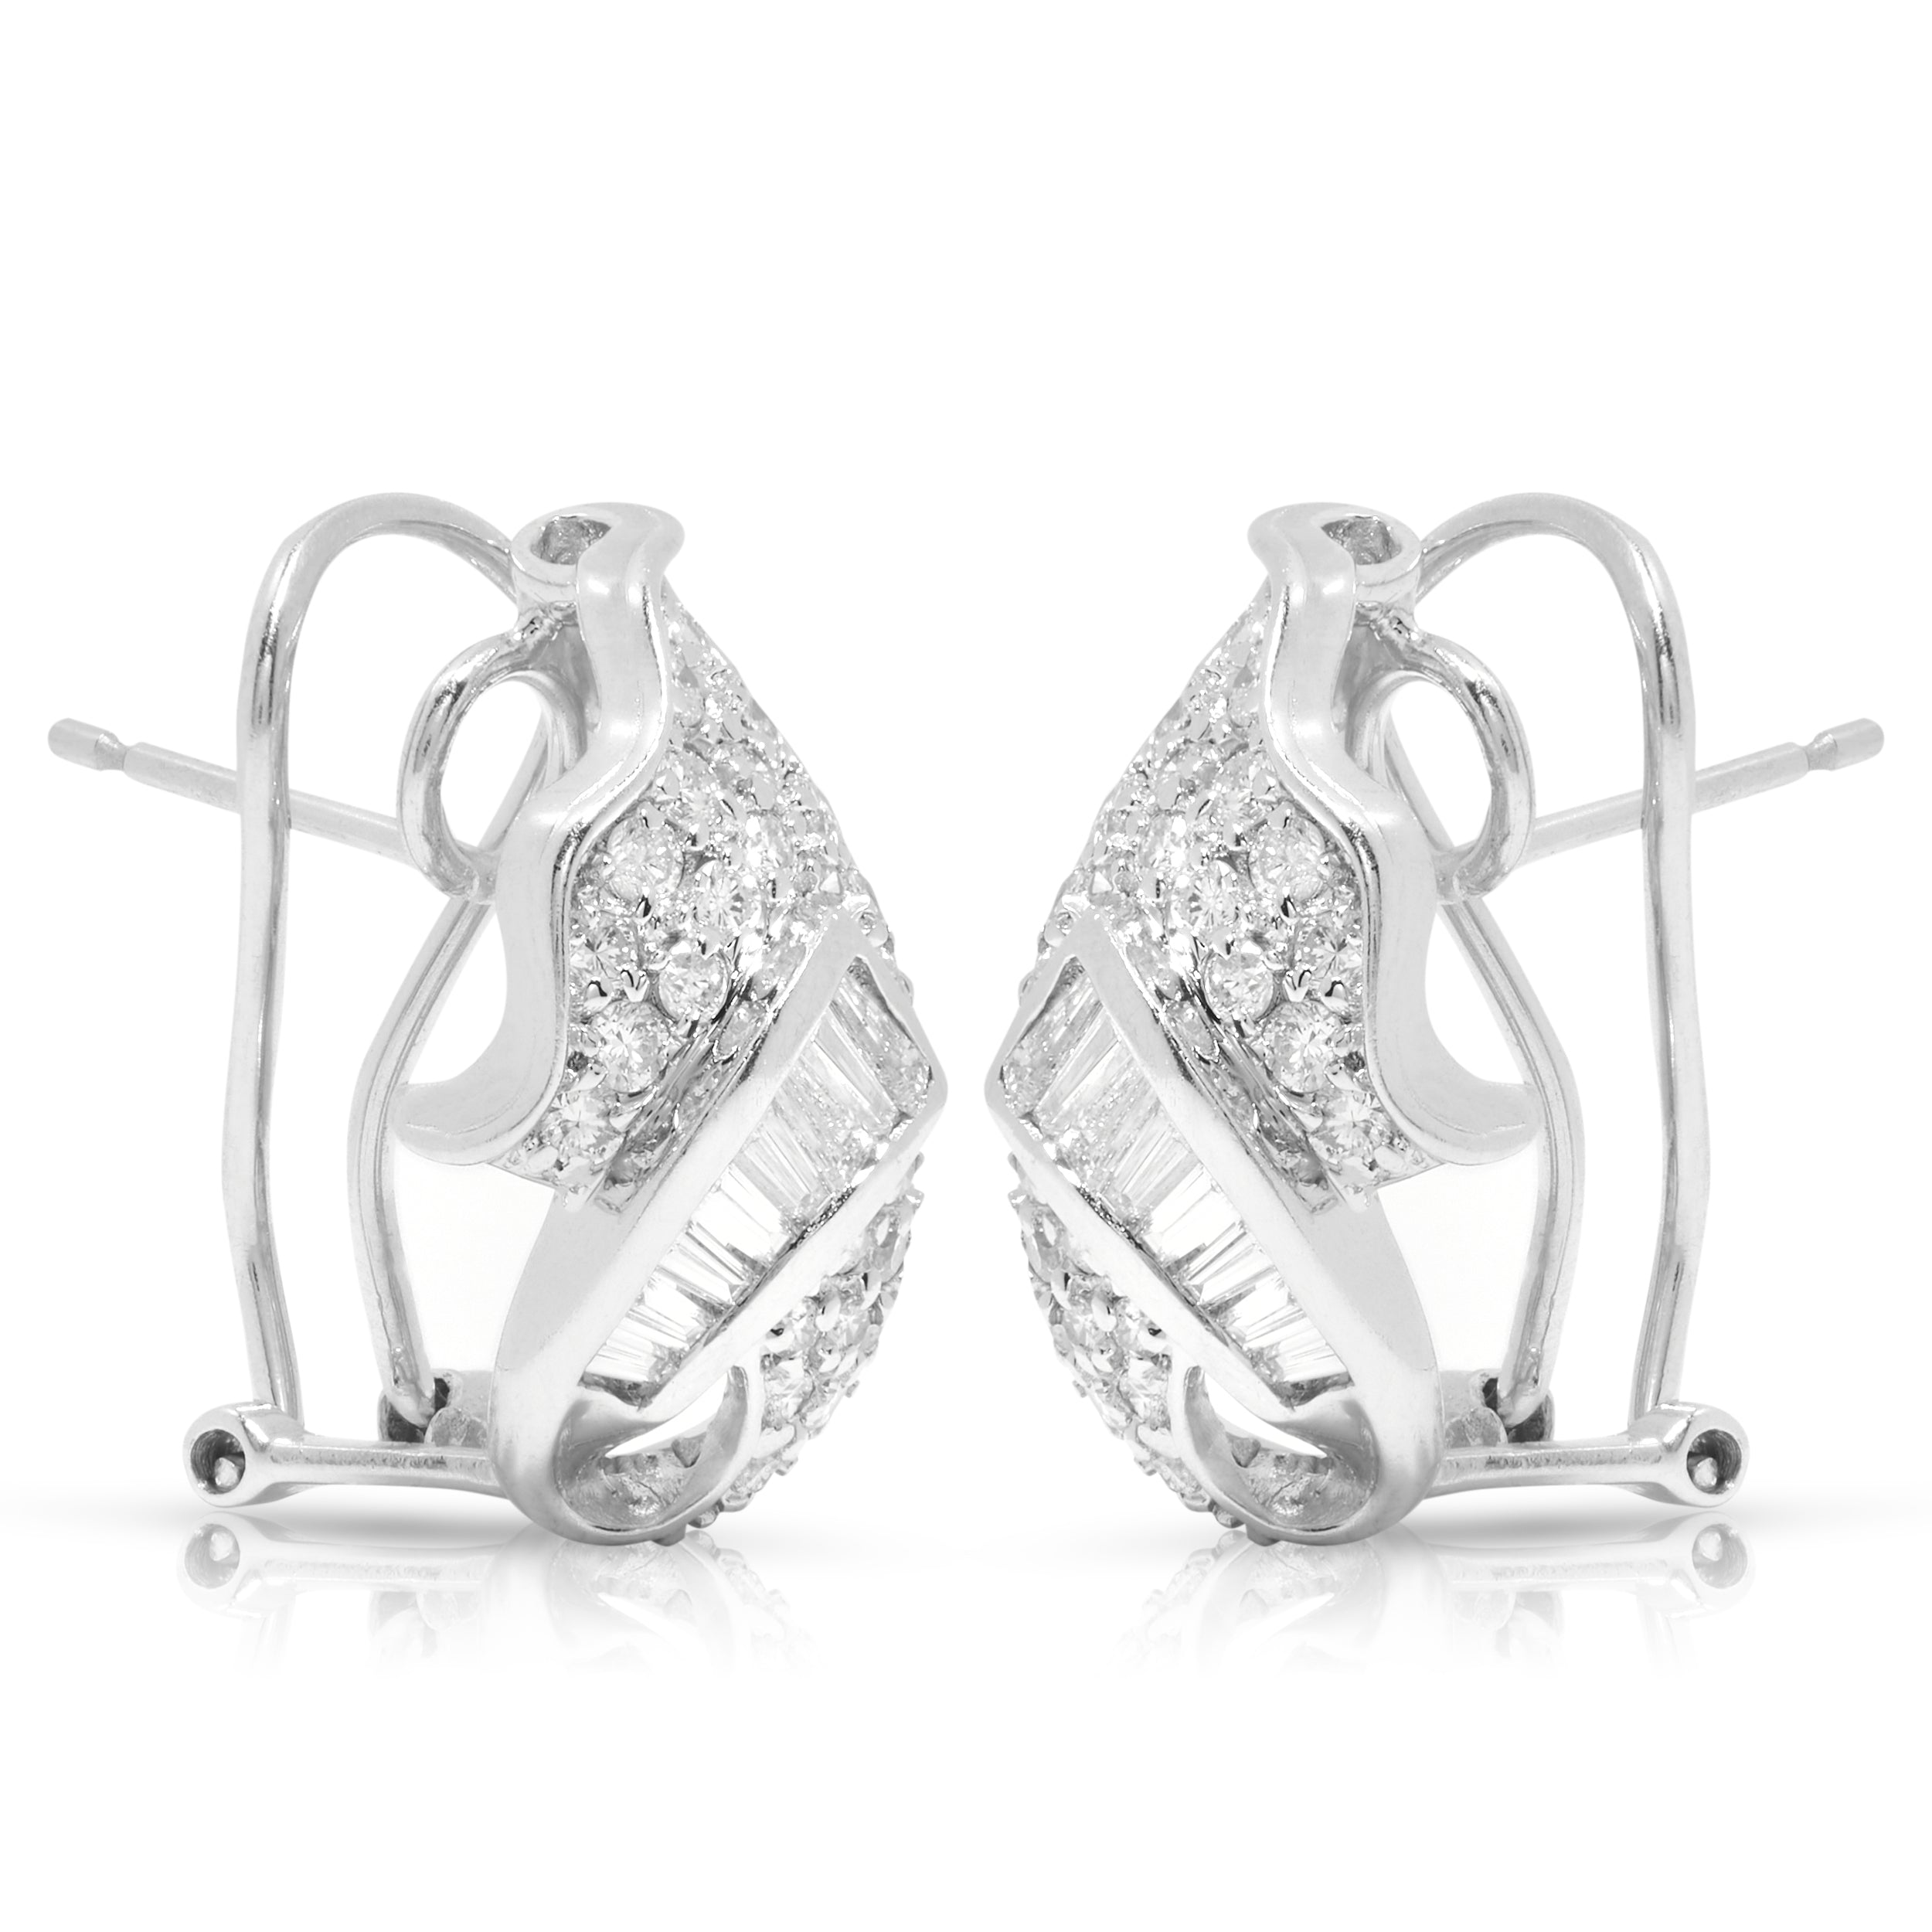 Side view of 1980s-1990s white gold earrings with diamonds.